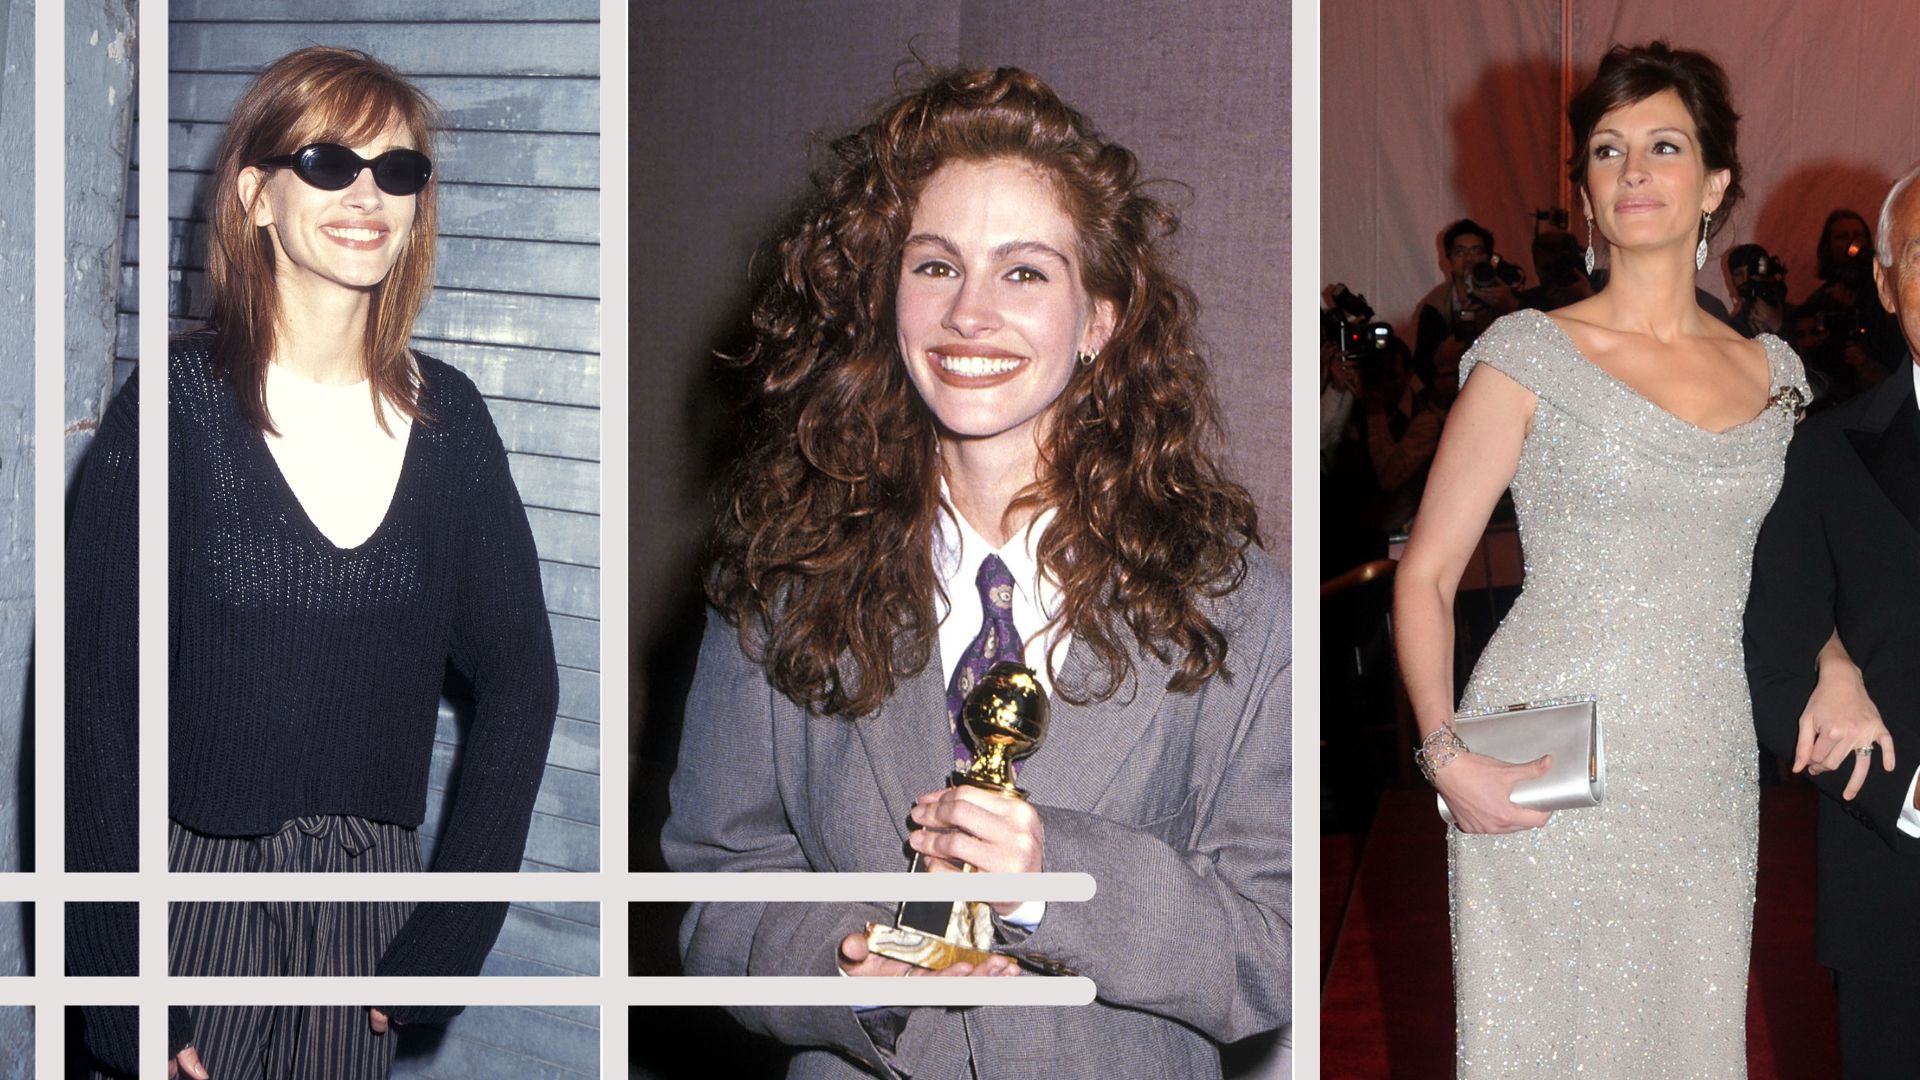 Julia Roberts' best looks from oversized suits to her slinkiest dresses